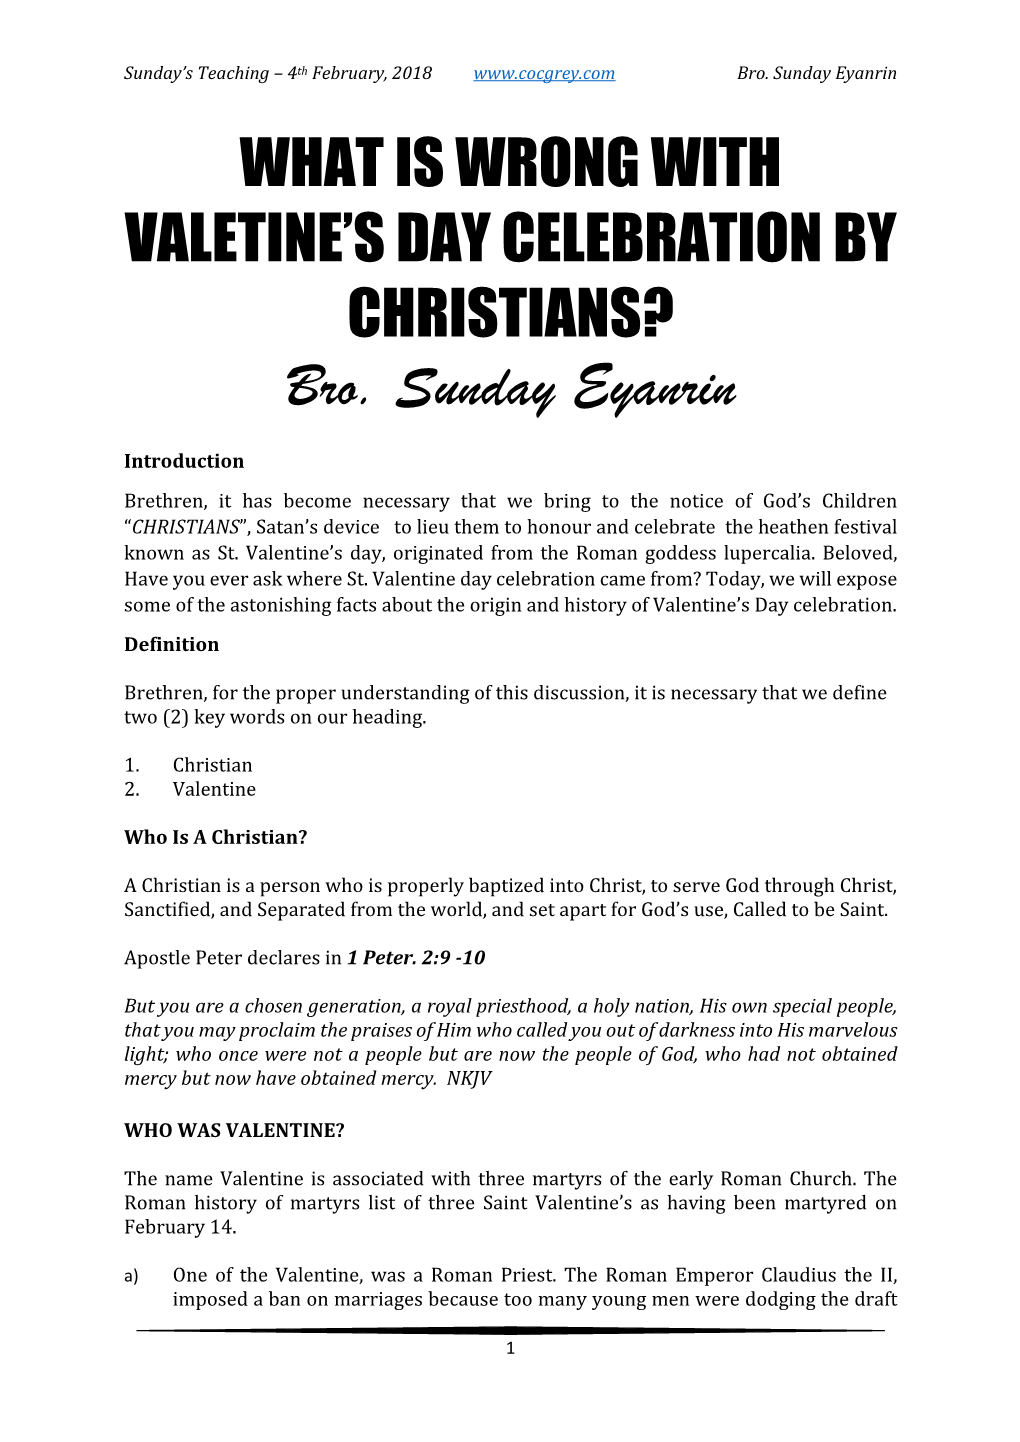 What Is Wrong with Valetine's Day Celebration By